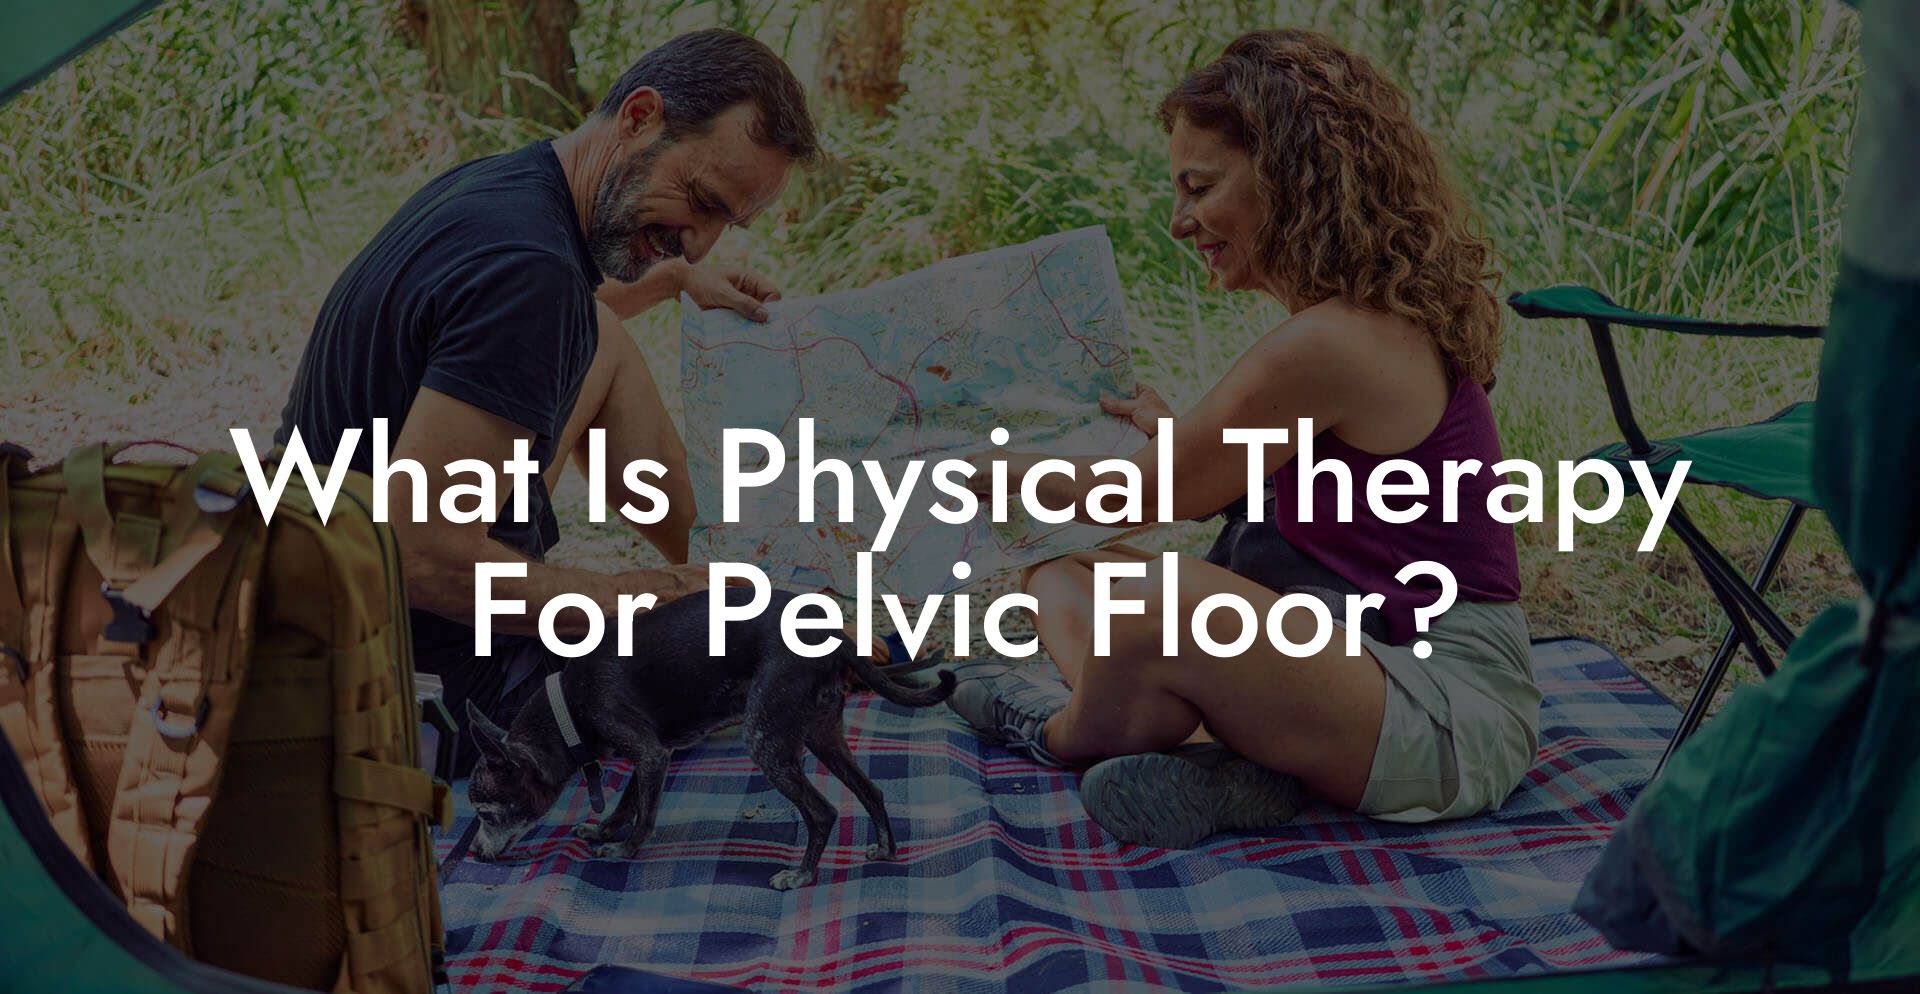 What Is Physical Therapy For Pelvic Floor?